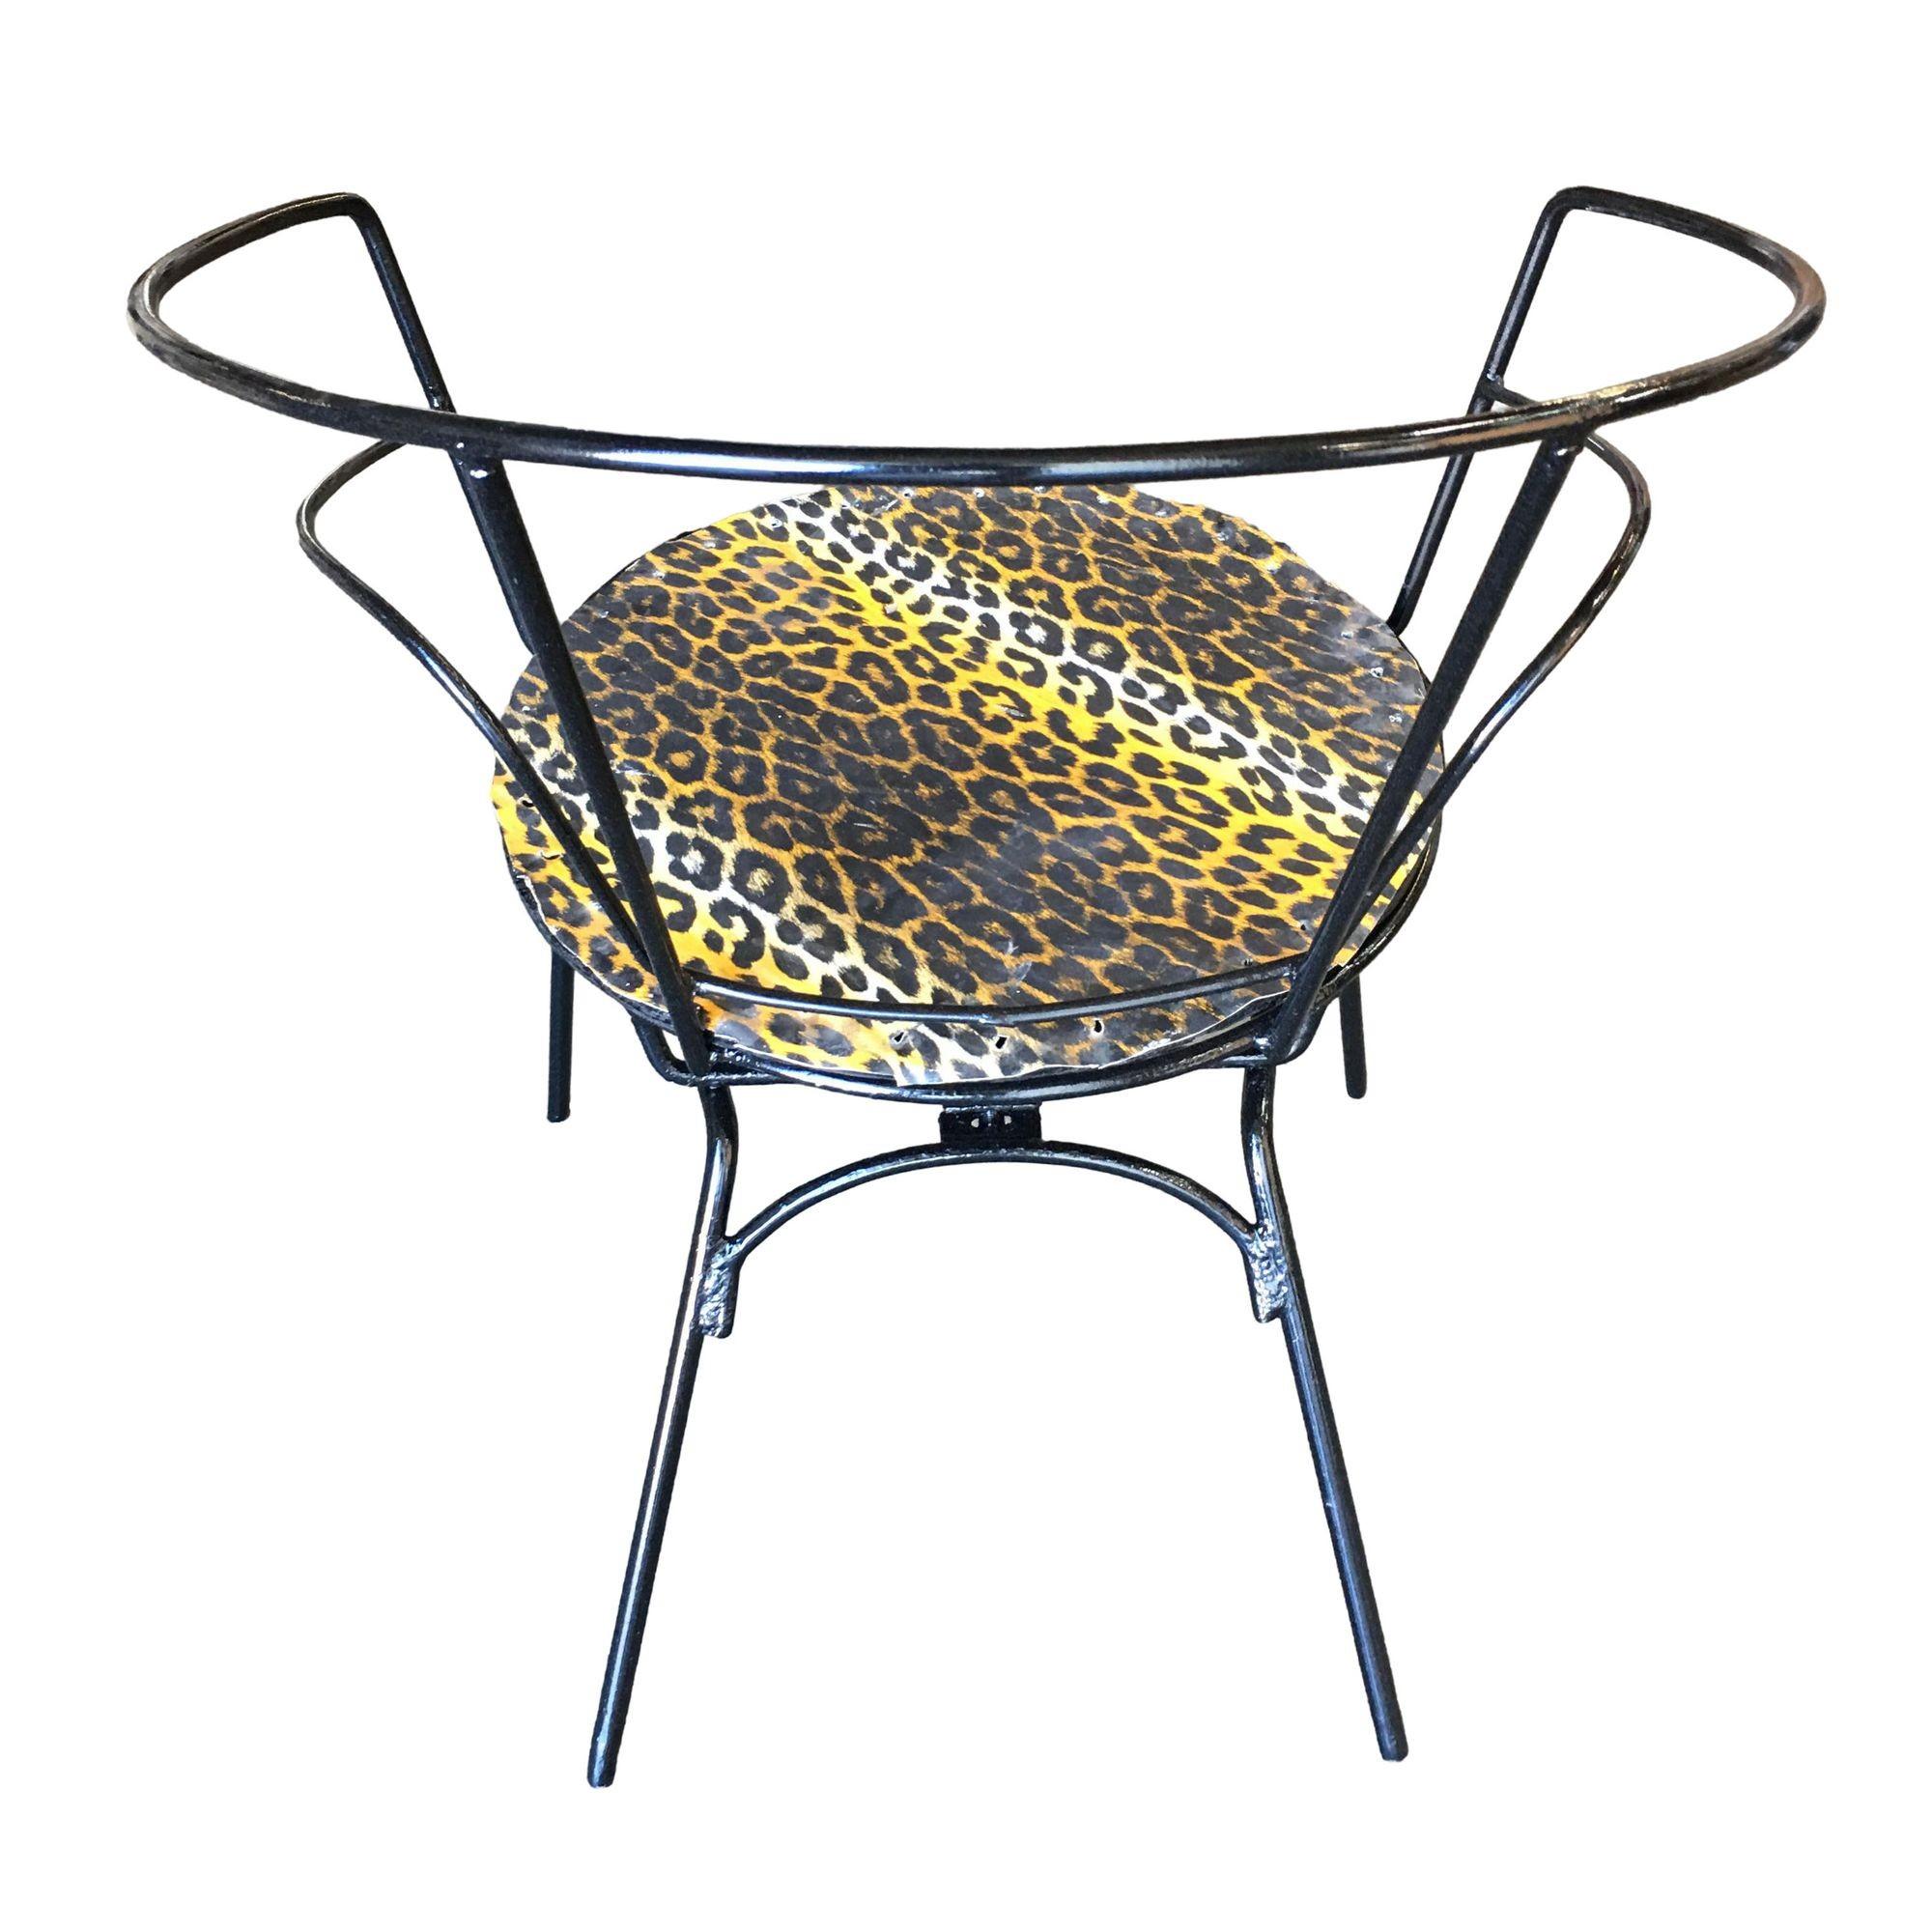 Atomic Age Iron Wire Side Armchair w/ Leopard Print Seat, Pair In Excellent Condition For Sale In Van Nuys, CA